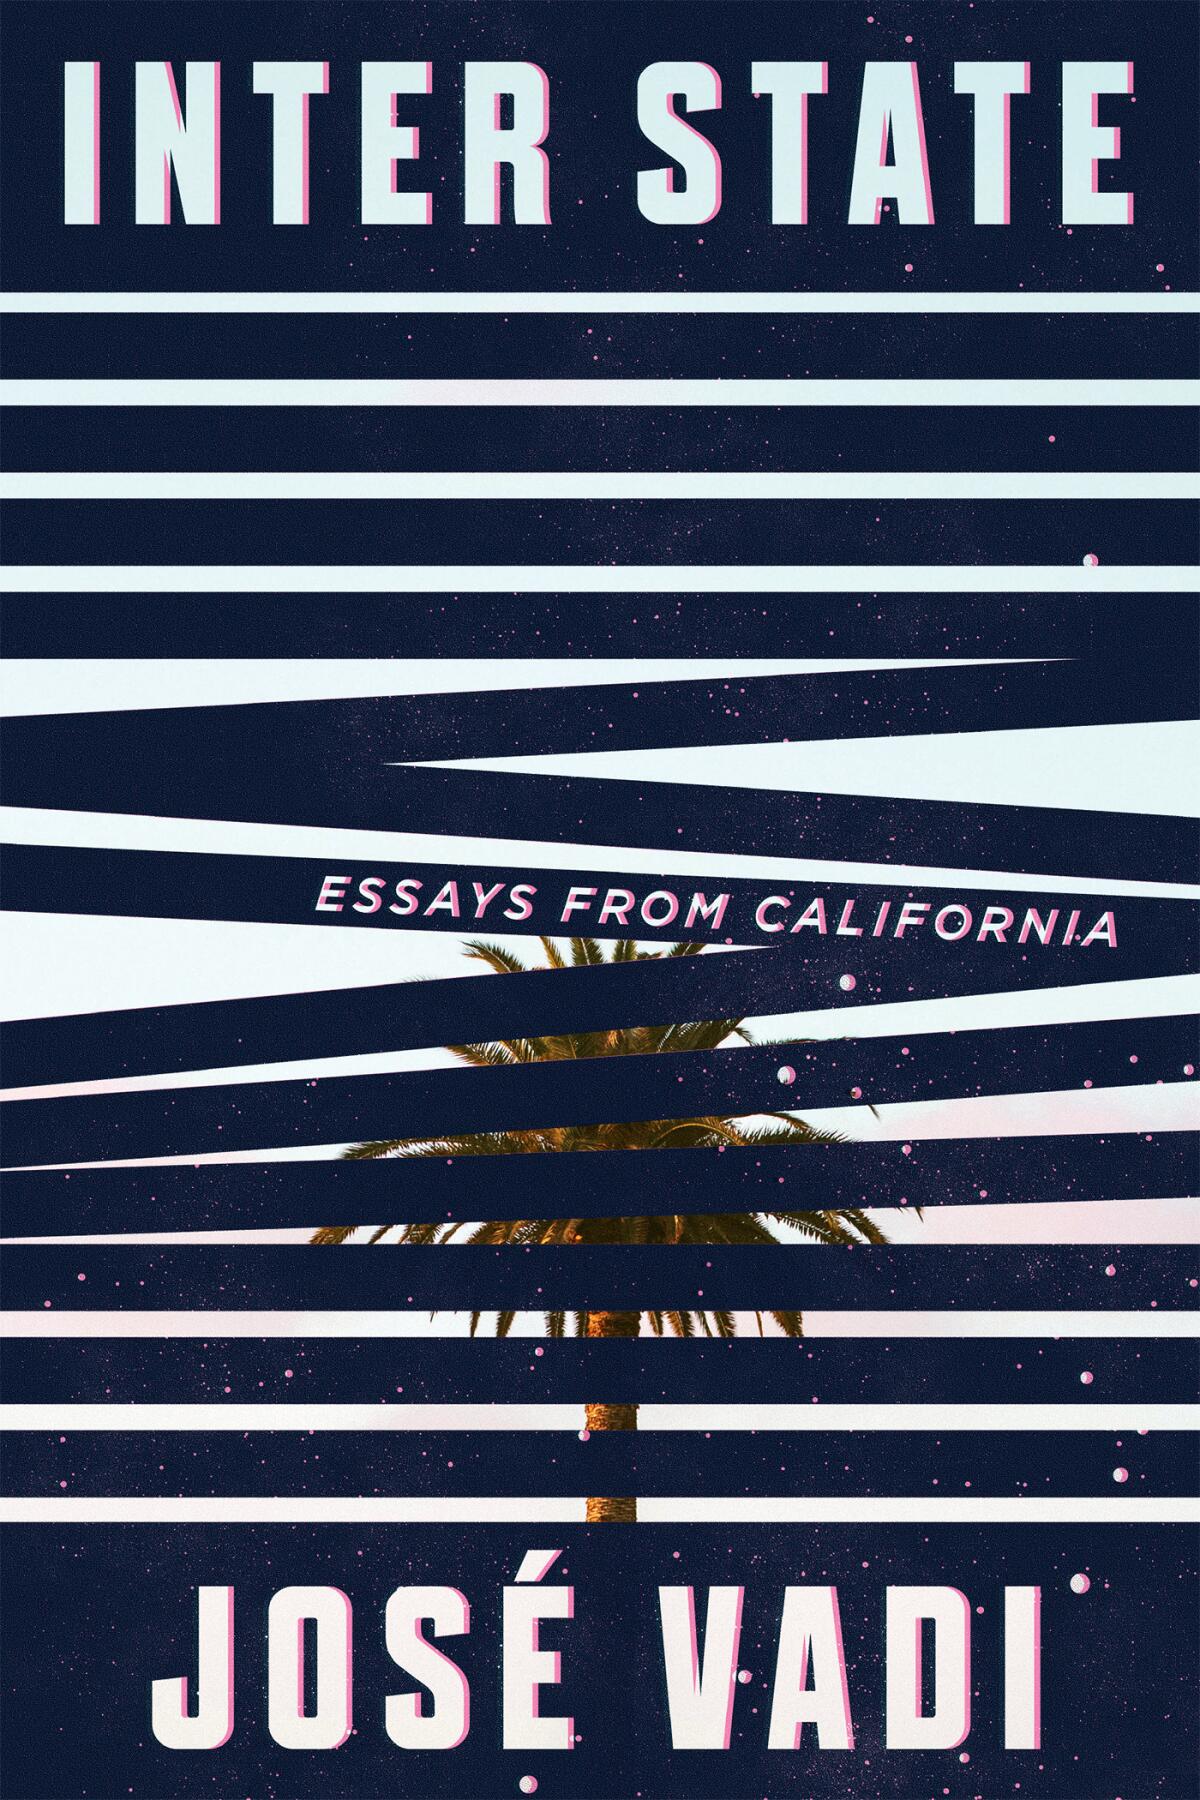 Book jacket of Jose Vadi's "Inter State, Essays from California."